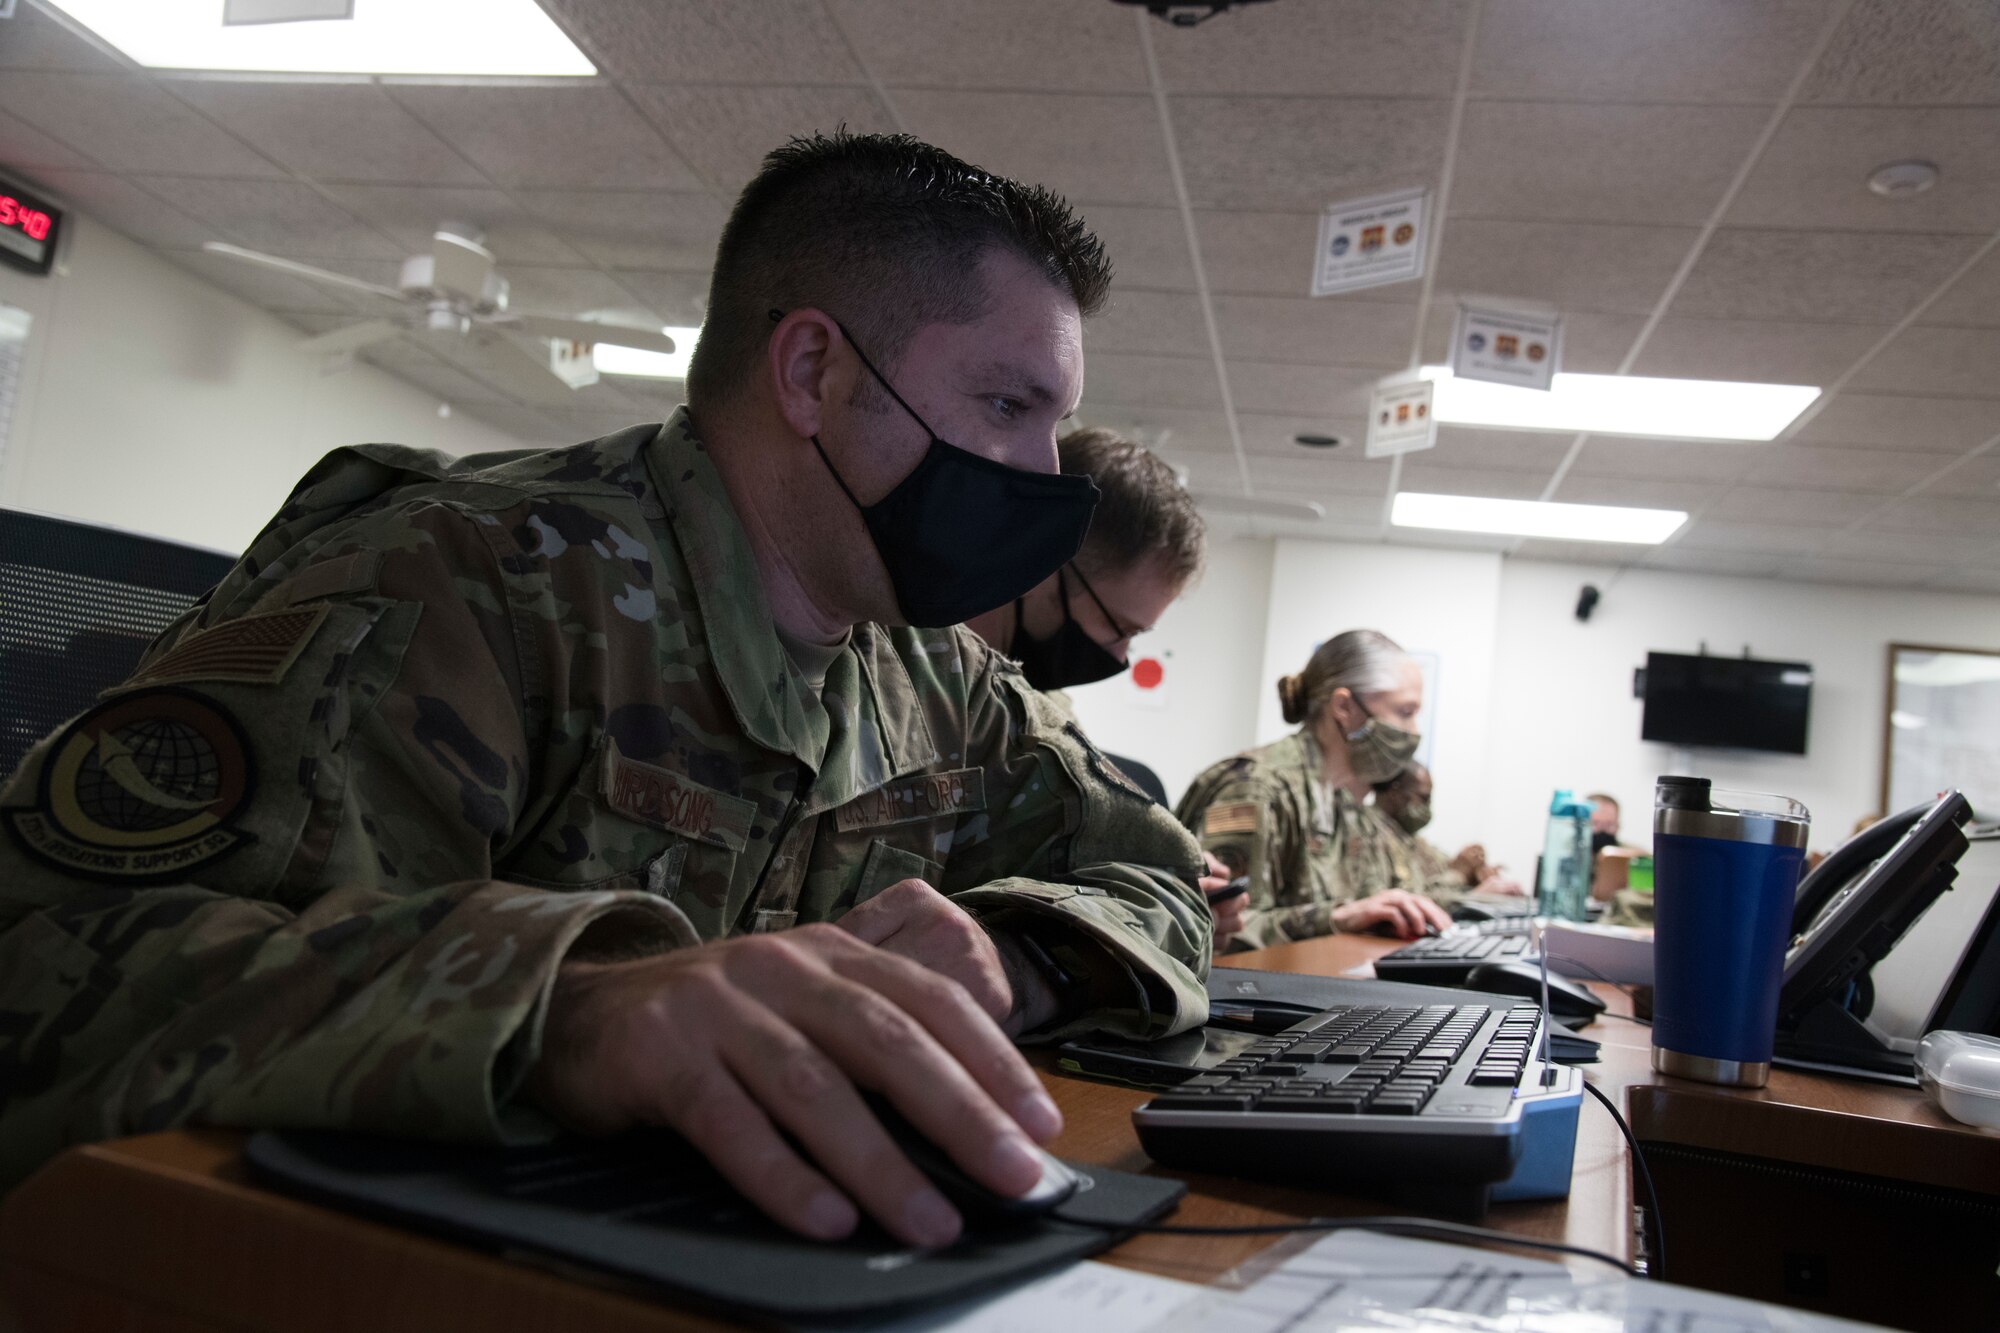 U.S. Air Force officer uses computer